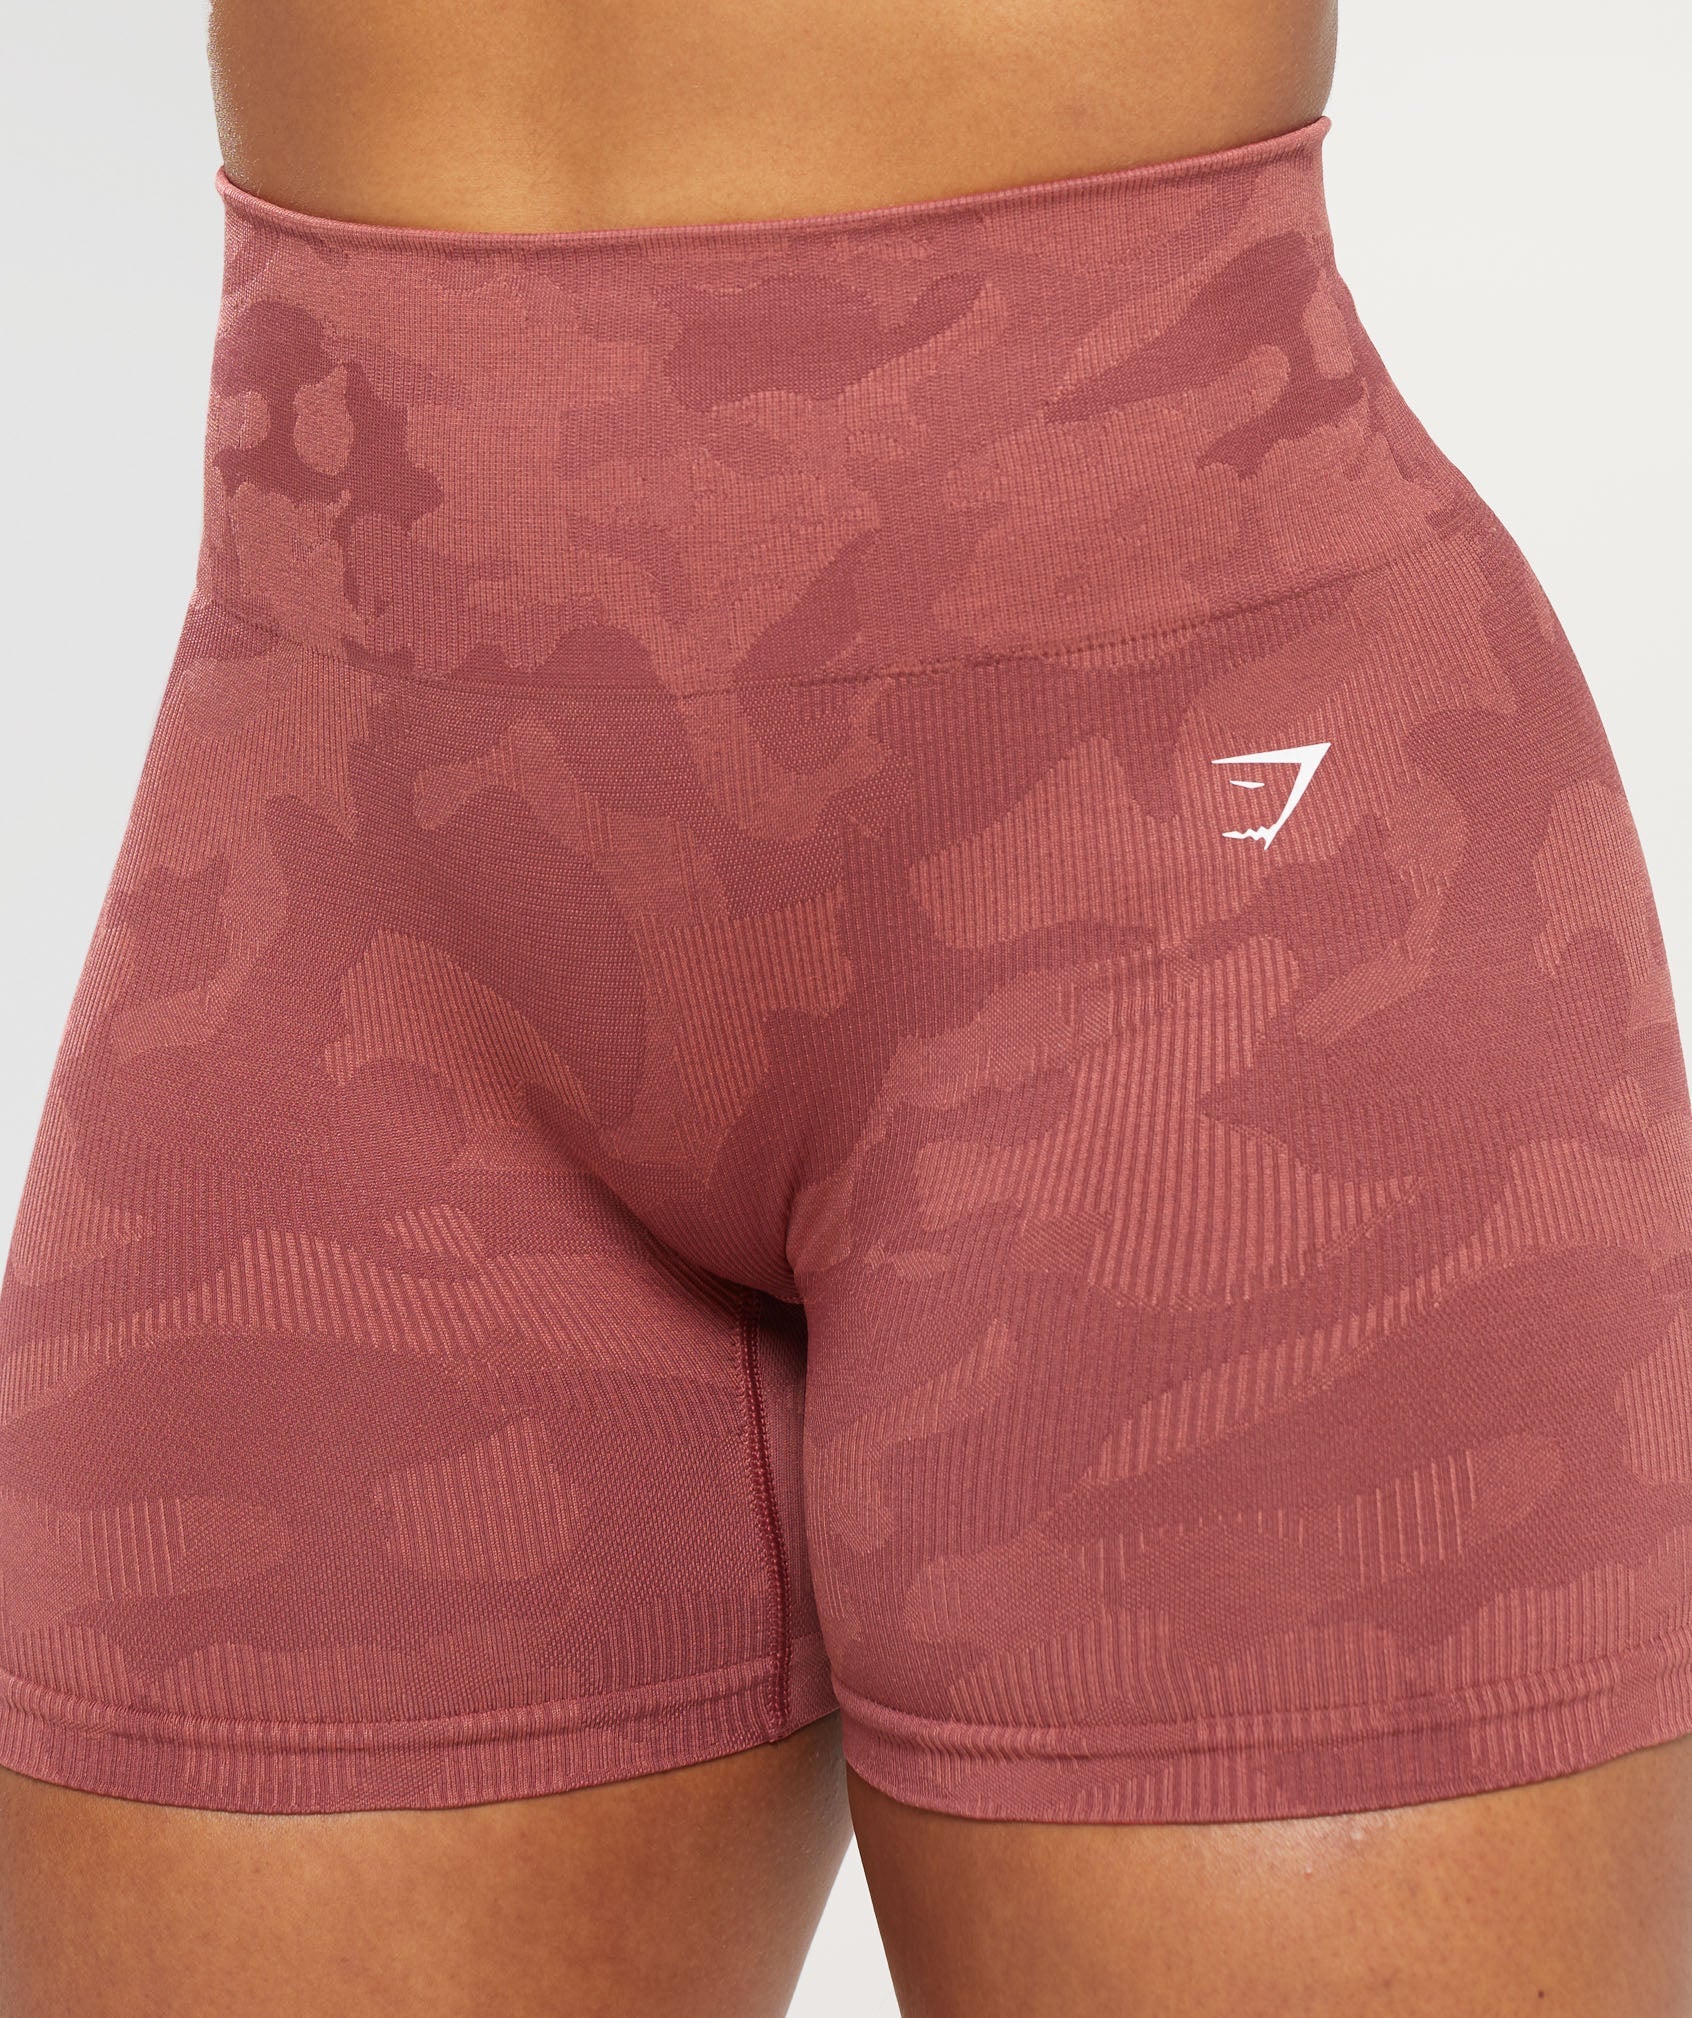 Adapt Camo Seamless Ribbed Shorts in Soft Berry/Sunbaked Pink - view 5